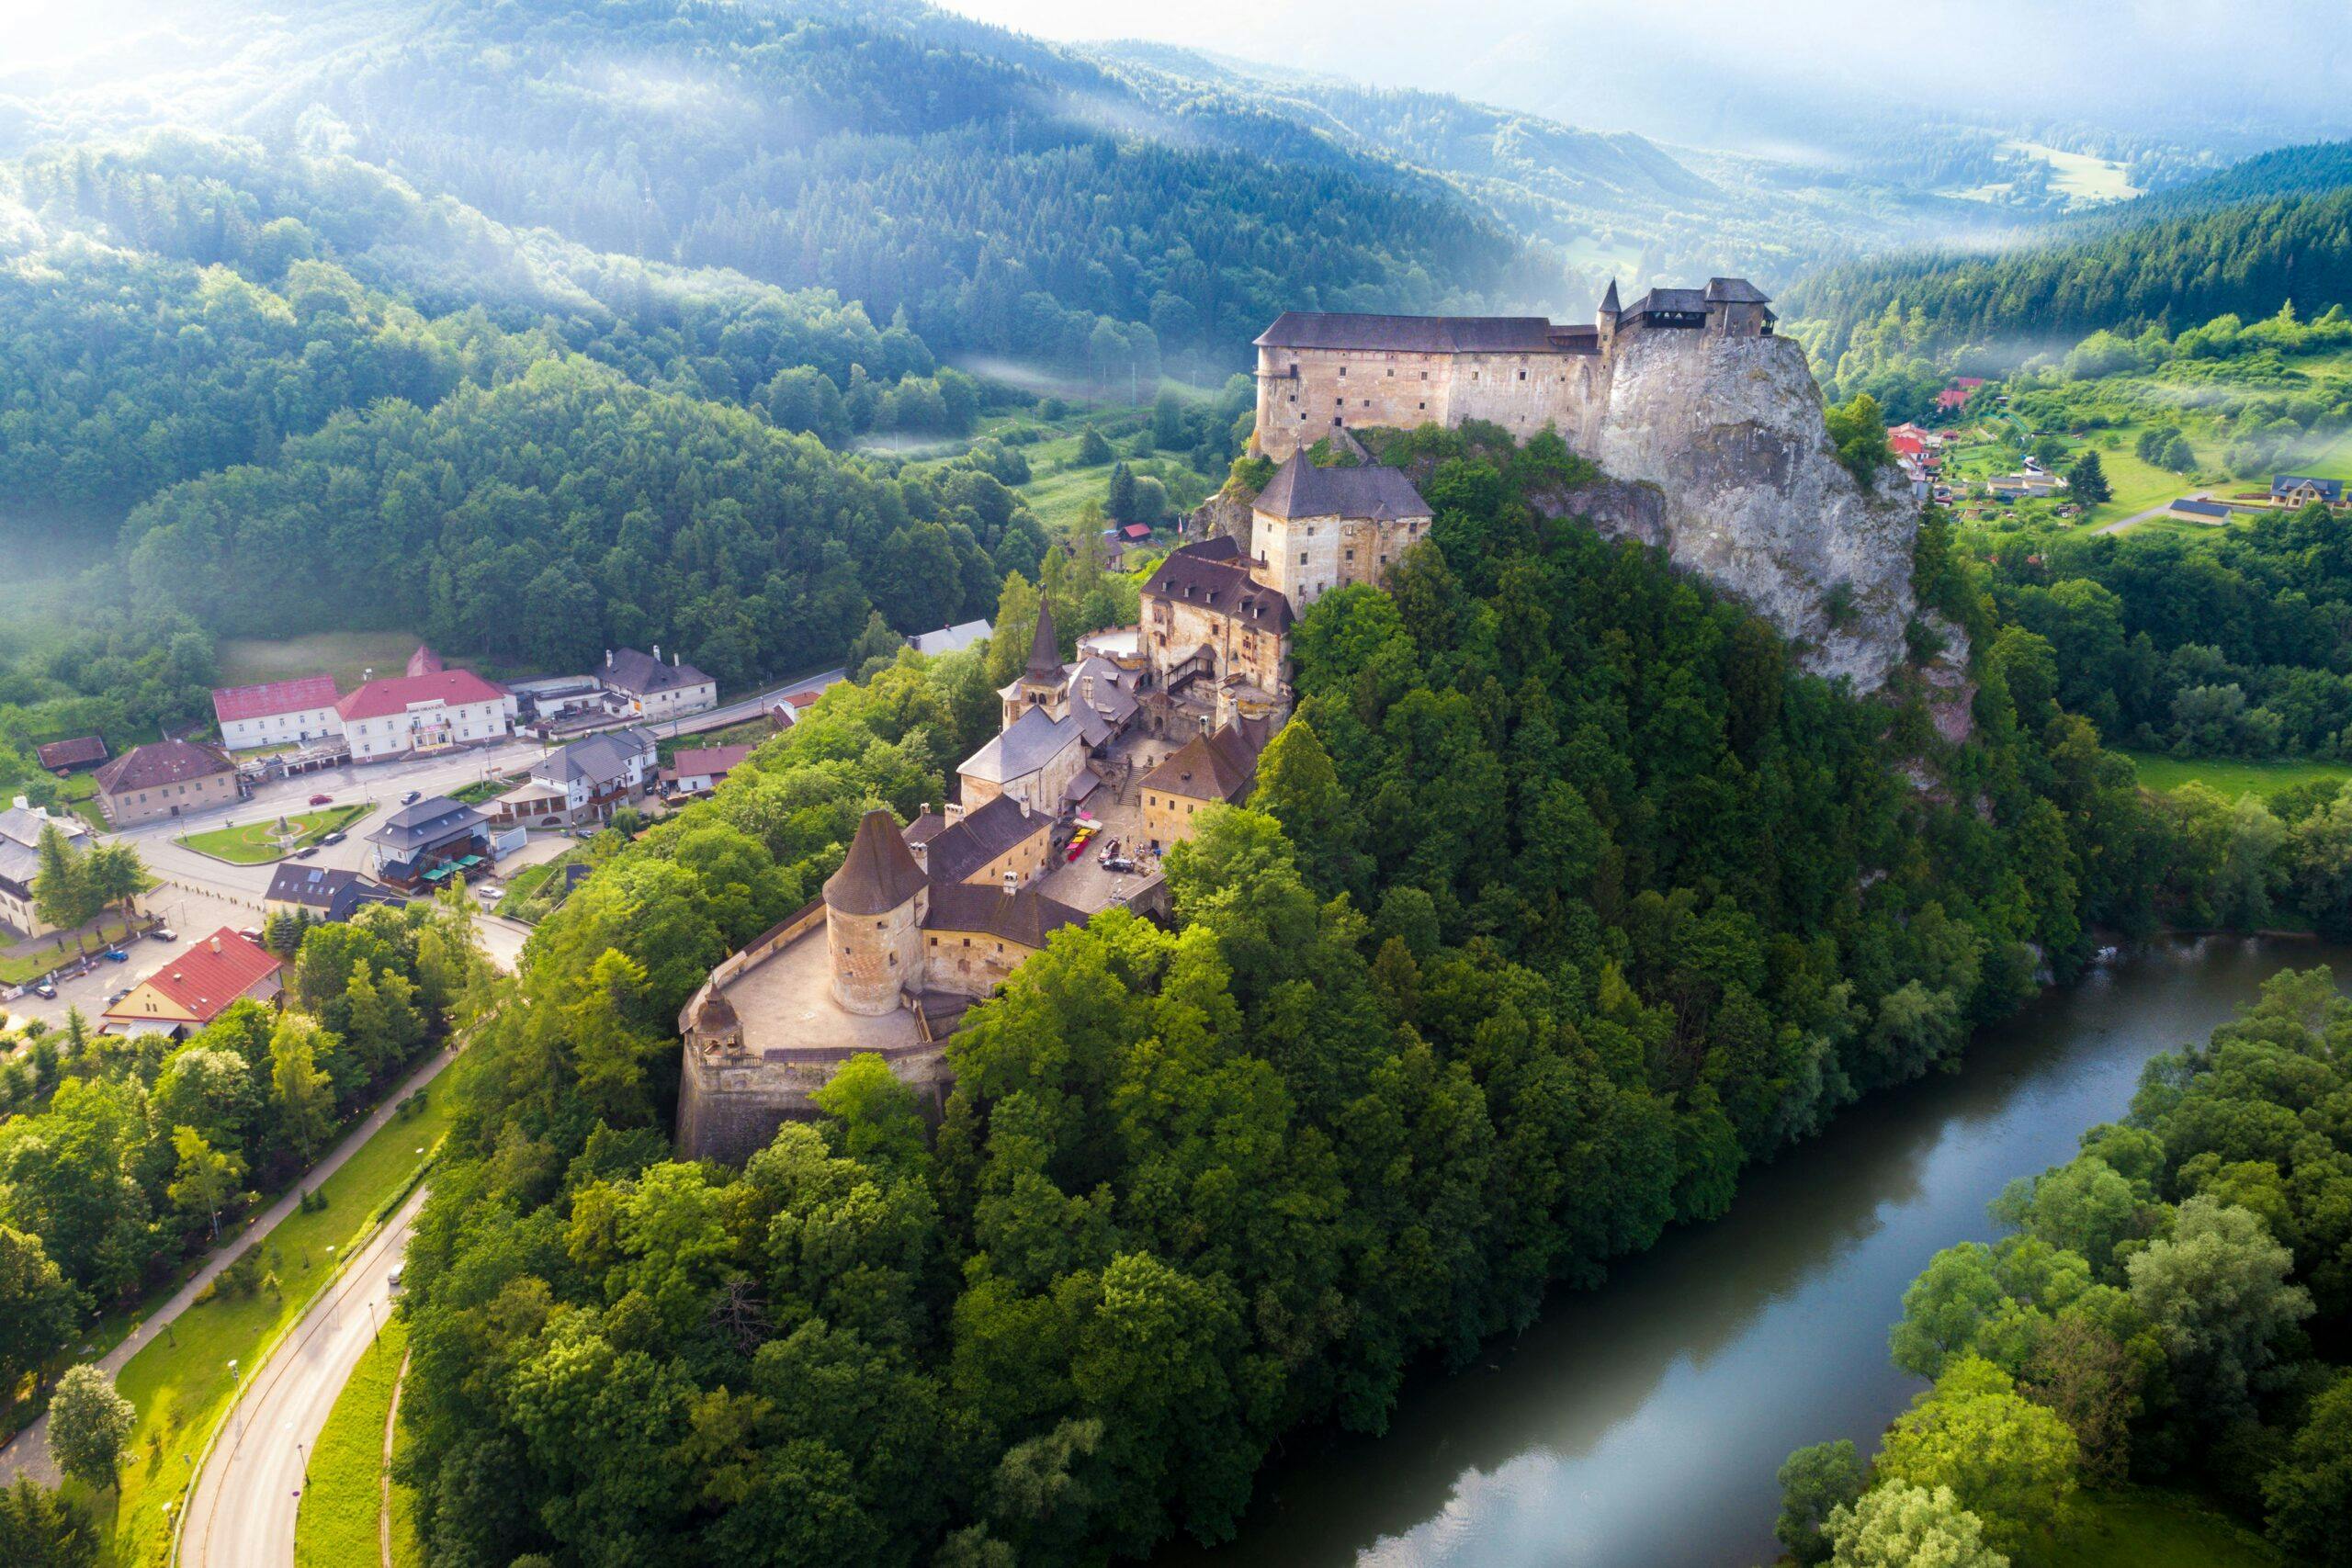 We're reimagining a fairer way to visit Slovakia